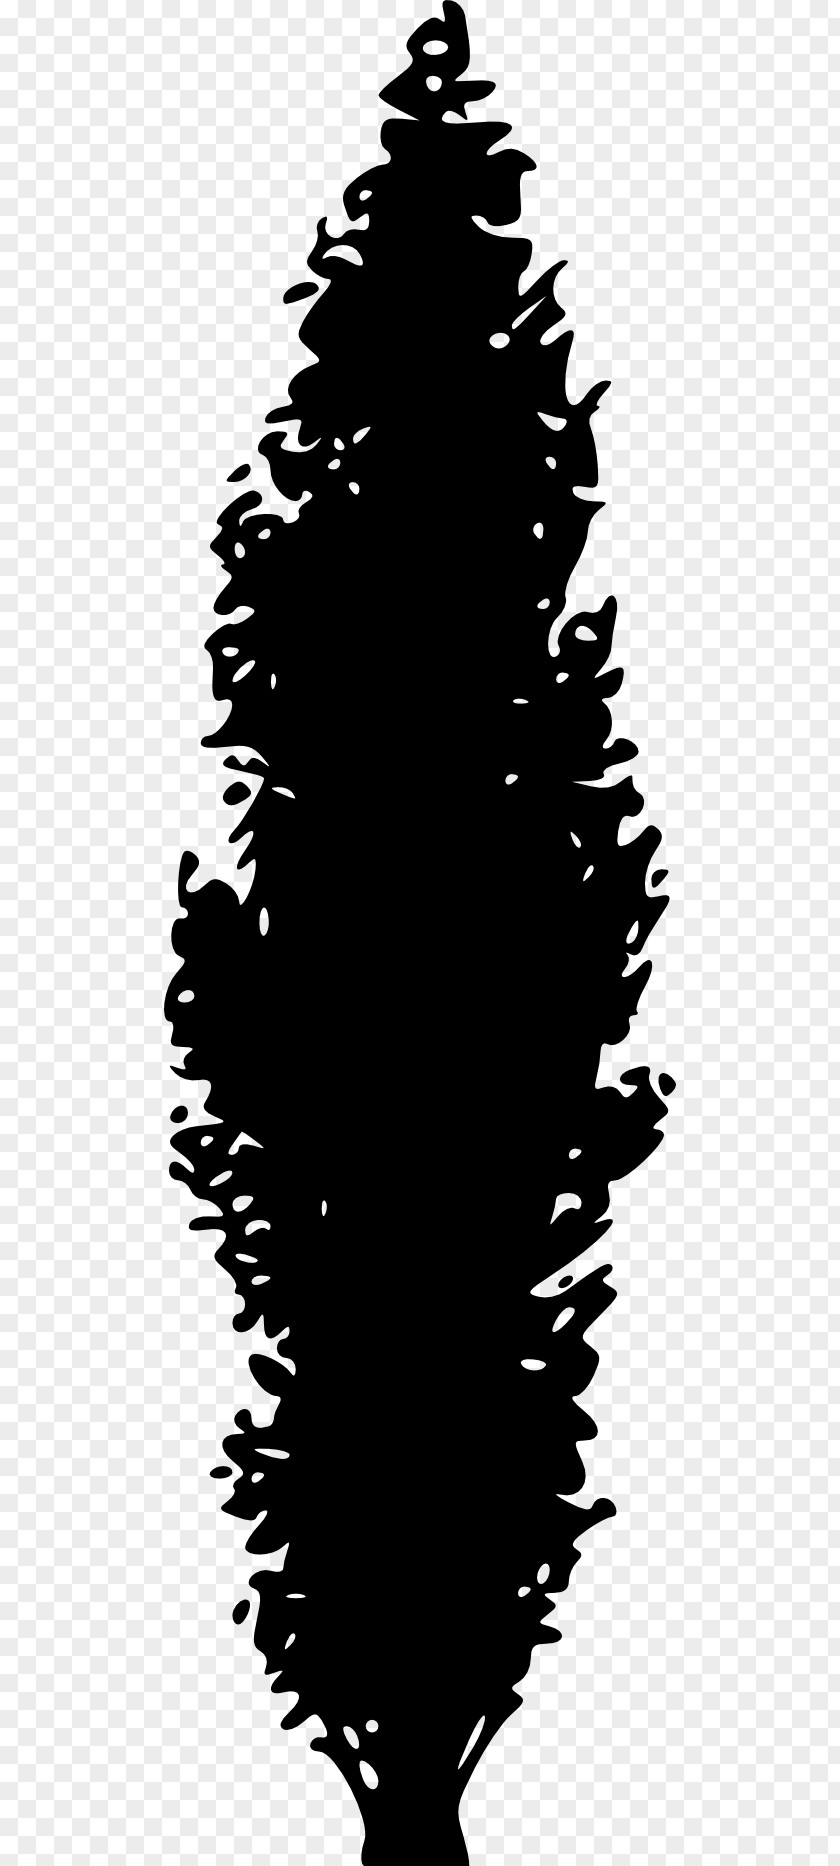 Tree Silhouette Pine Clip Art PNG